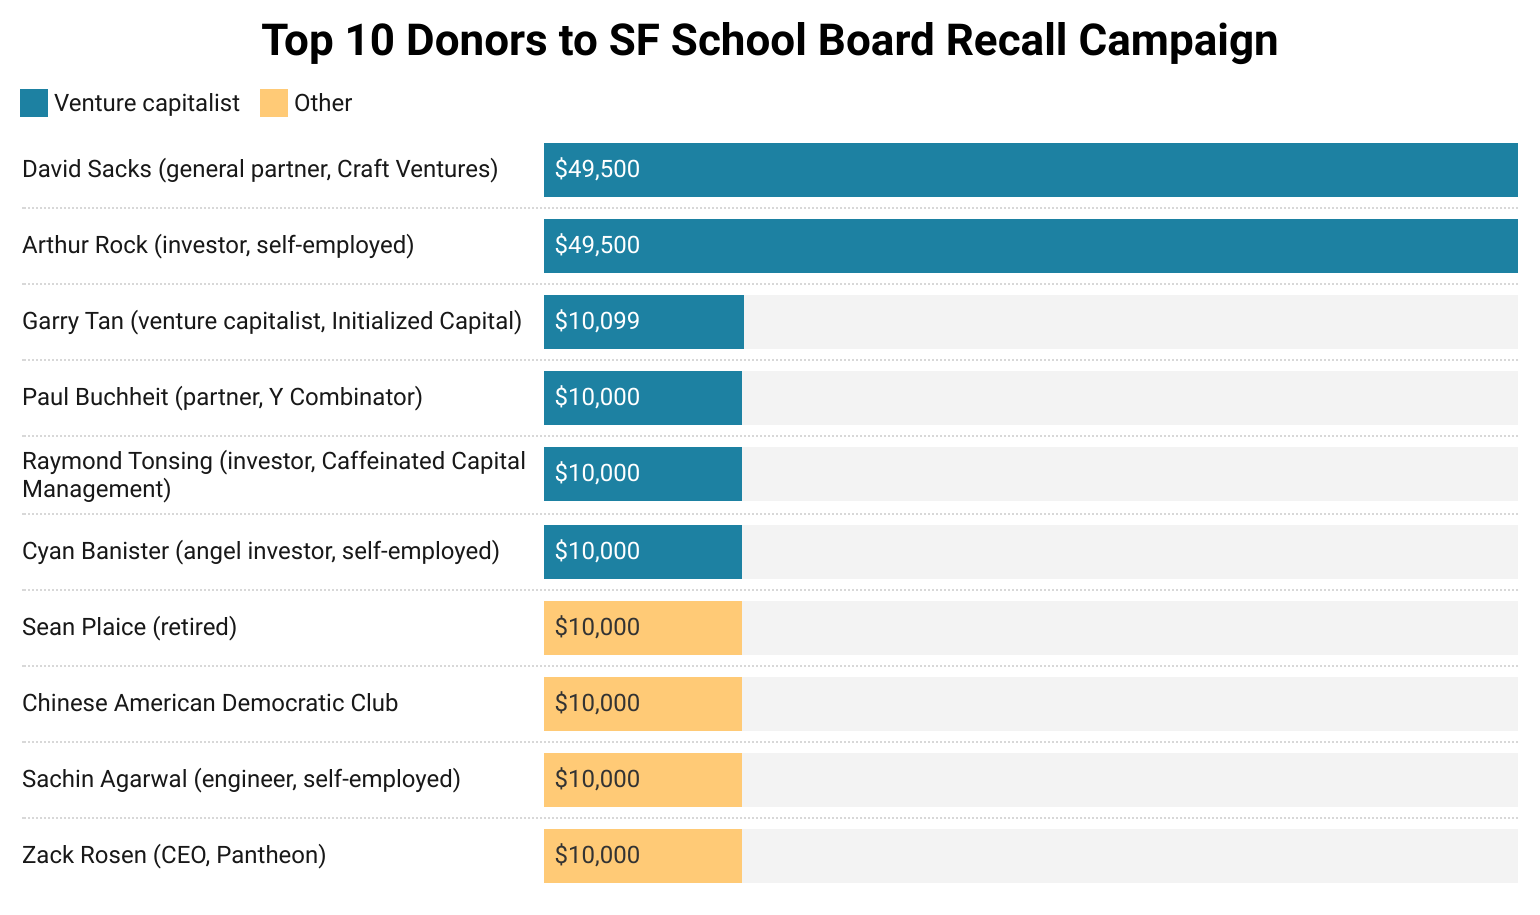 A horizontal bar chart showing top 10 donors to SF school board recall.